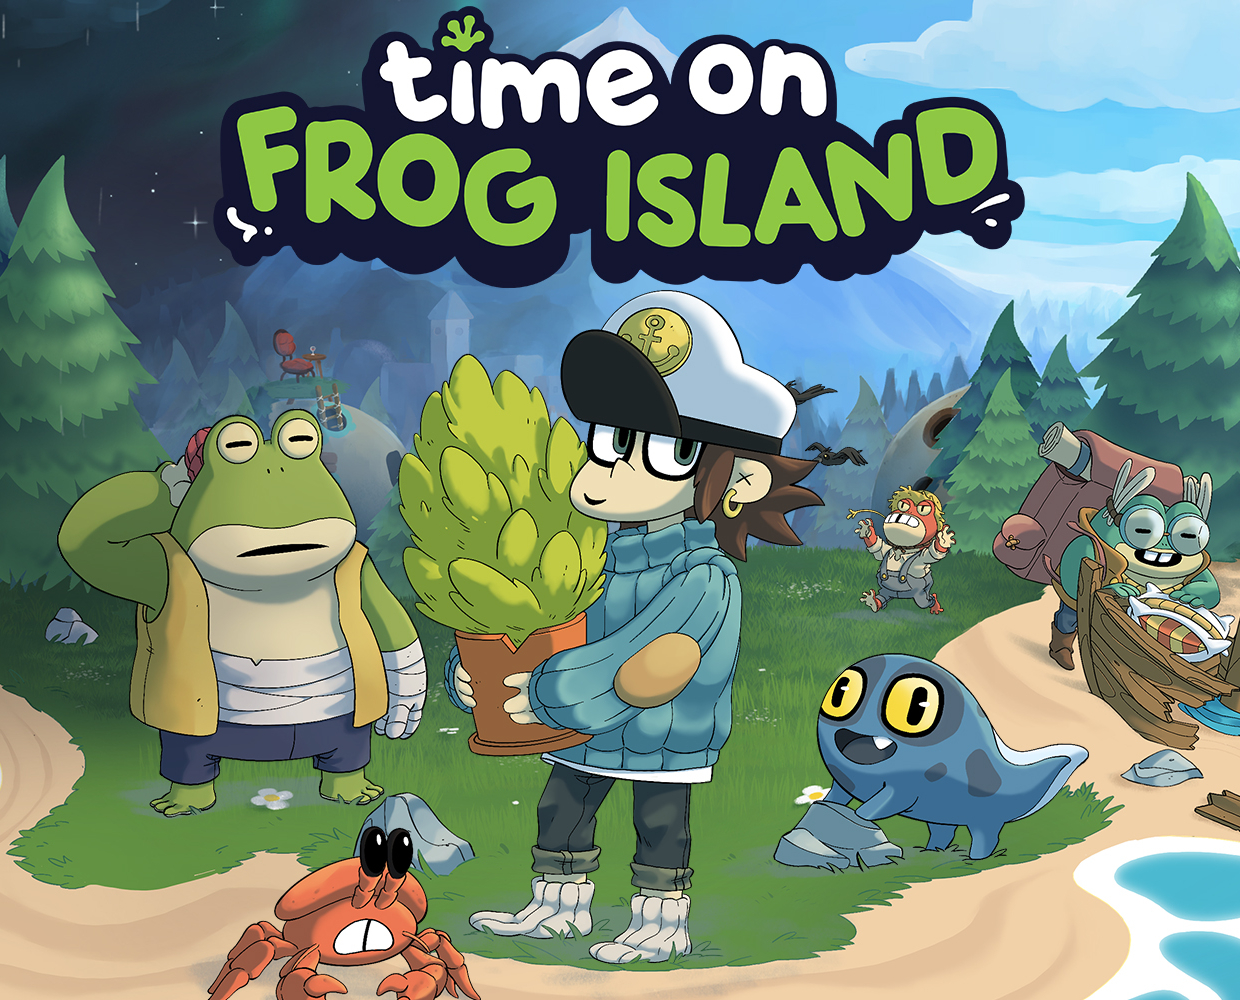 'Time on Frog Island' review: A delightful, if brief, study in simplicity